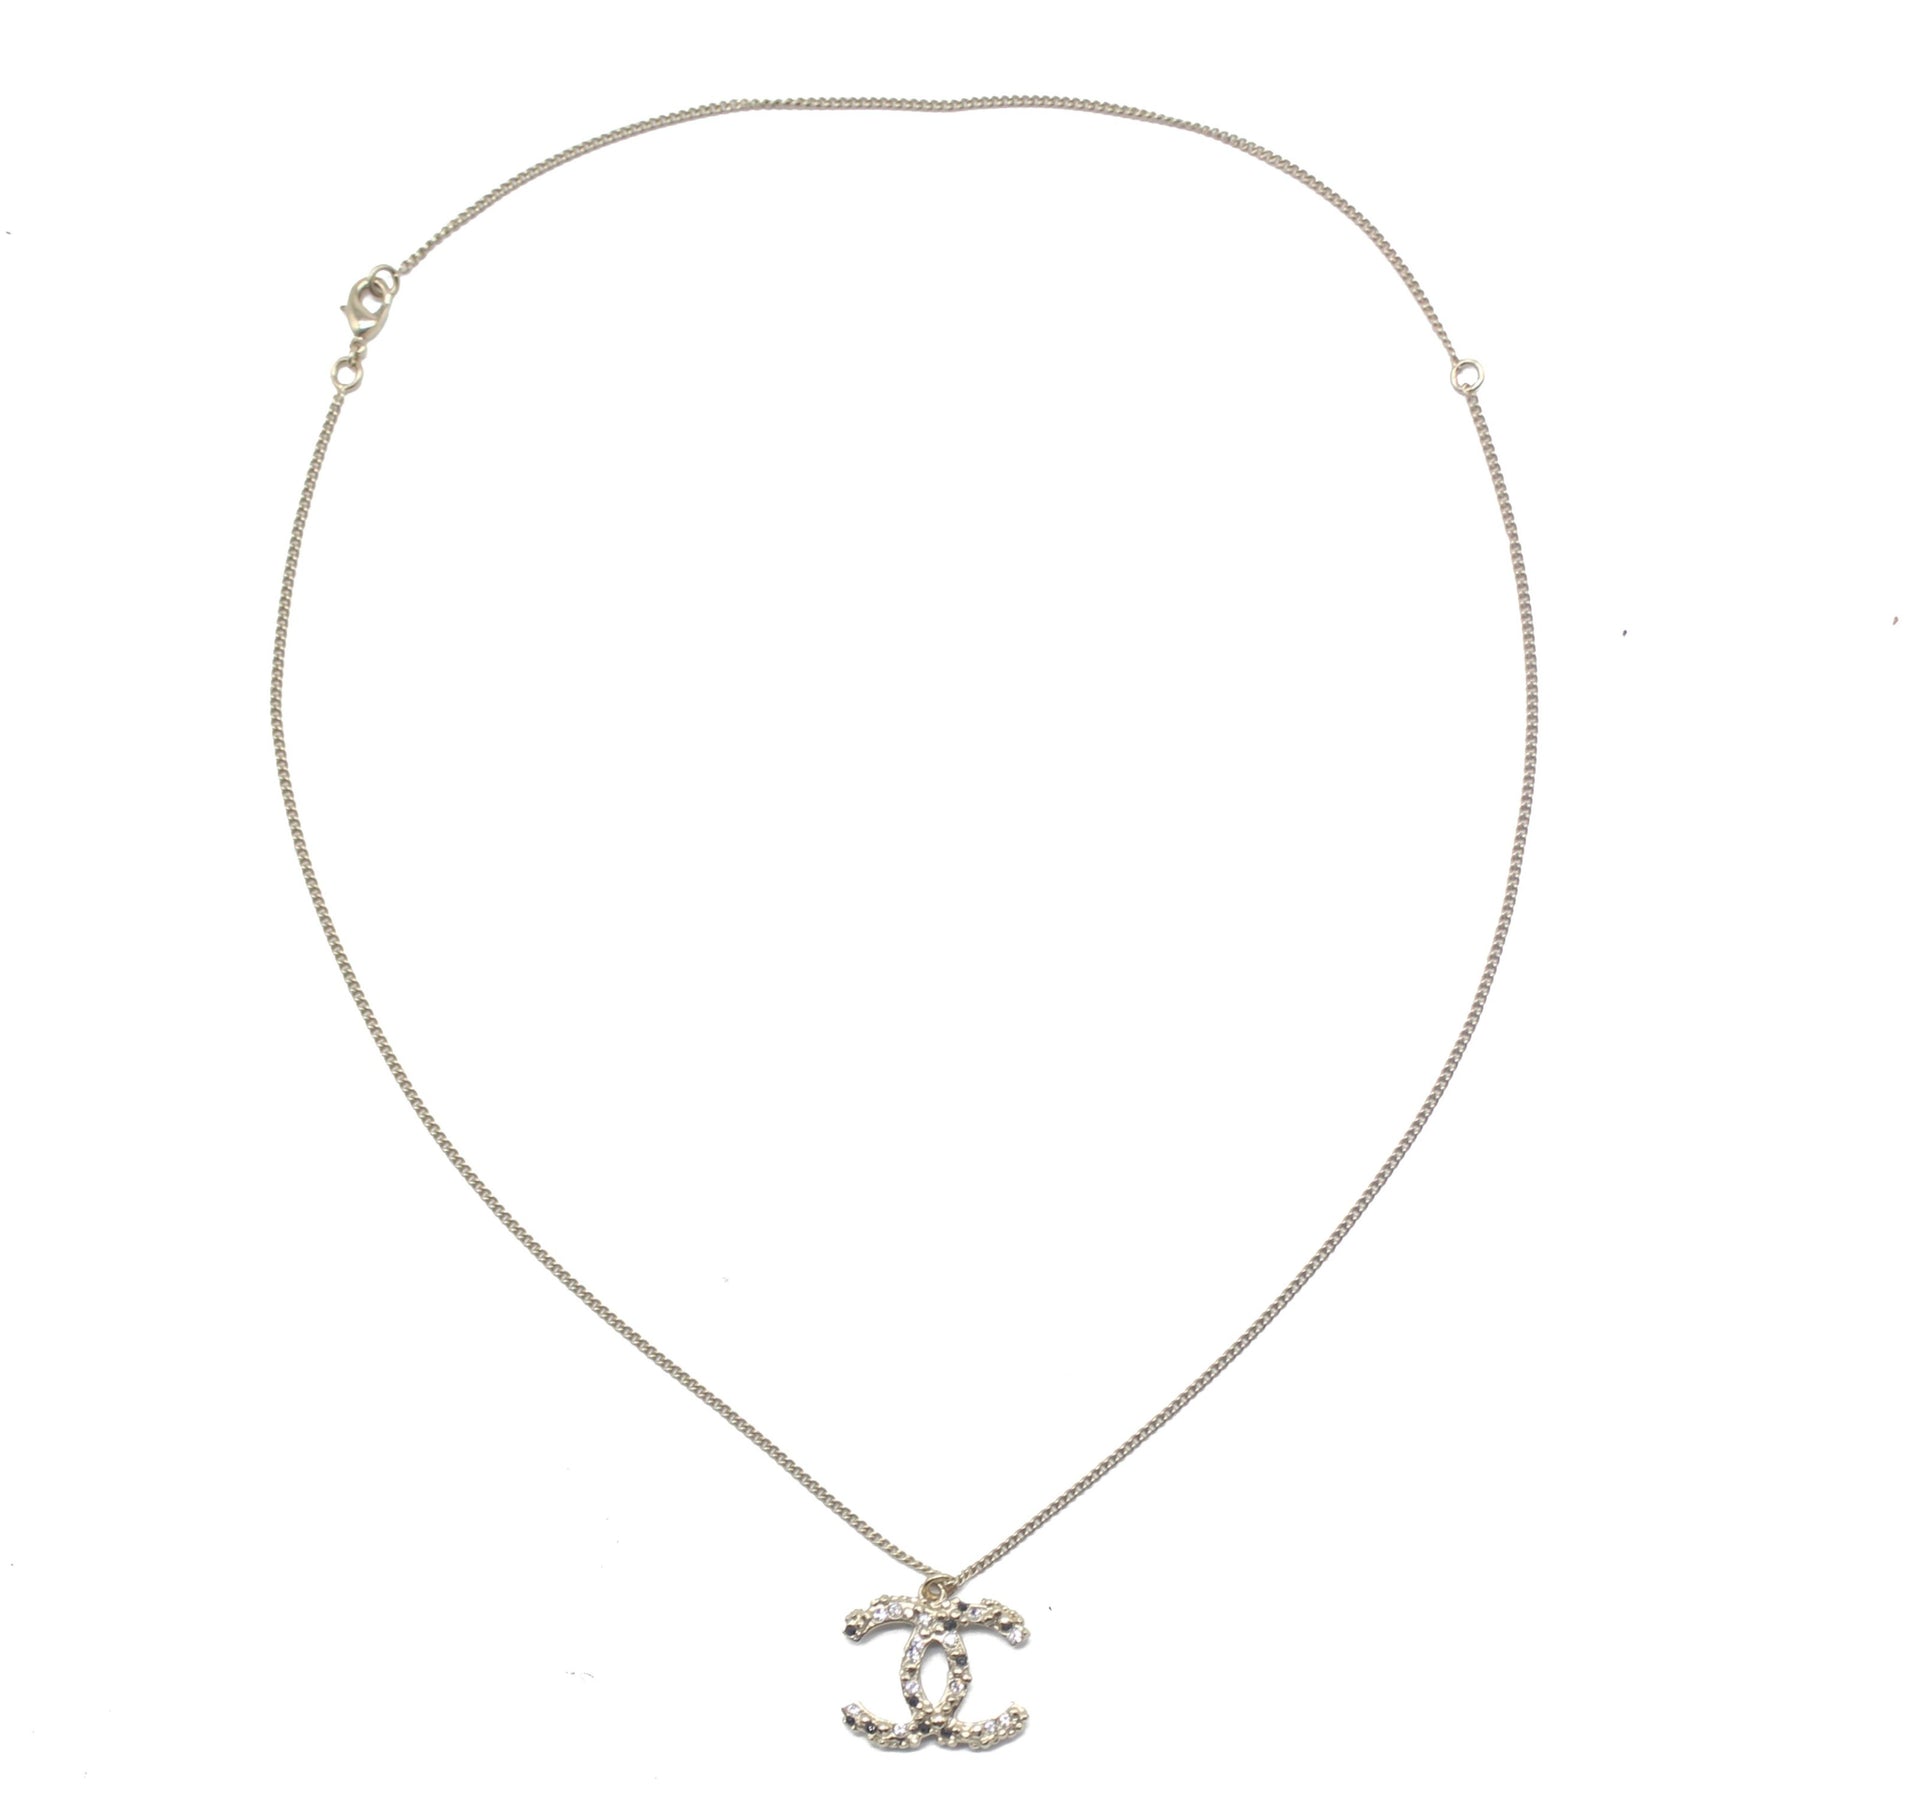 CHANEL Pearl Crystal CC Pendant Necklace Silver 941815  FASHIONPHILE